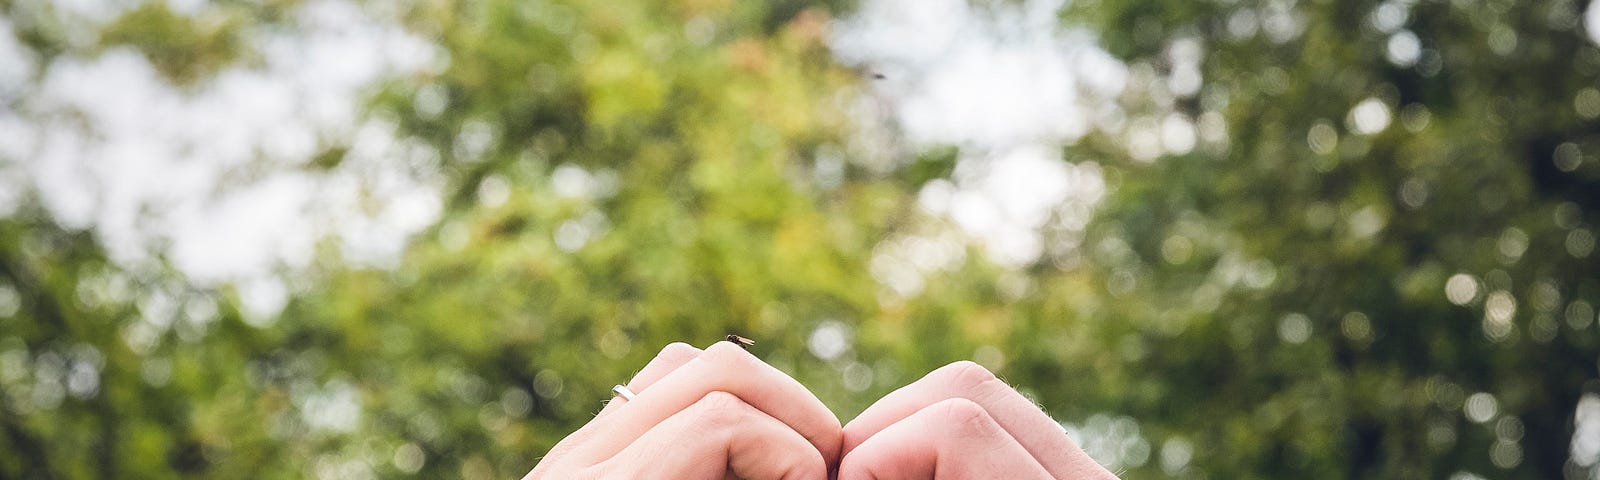 A man’s and woman’s hand combined to form a heart. Trees in the background.